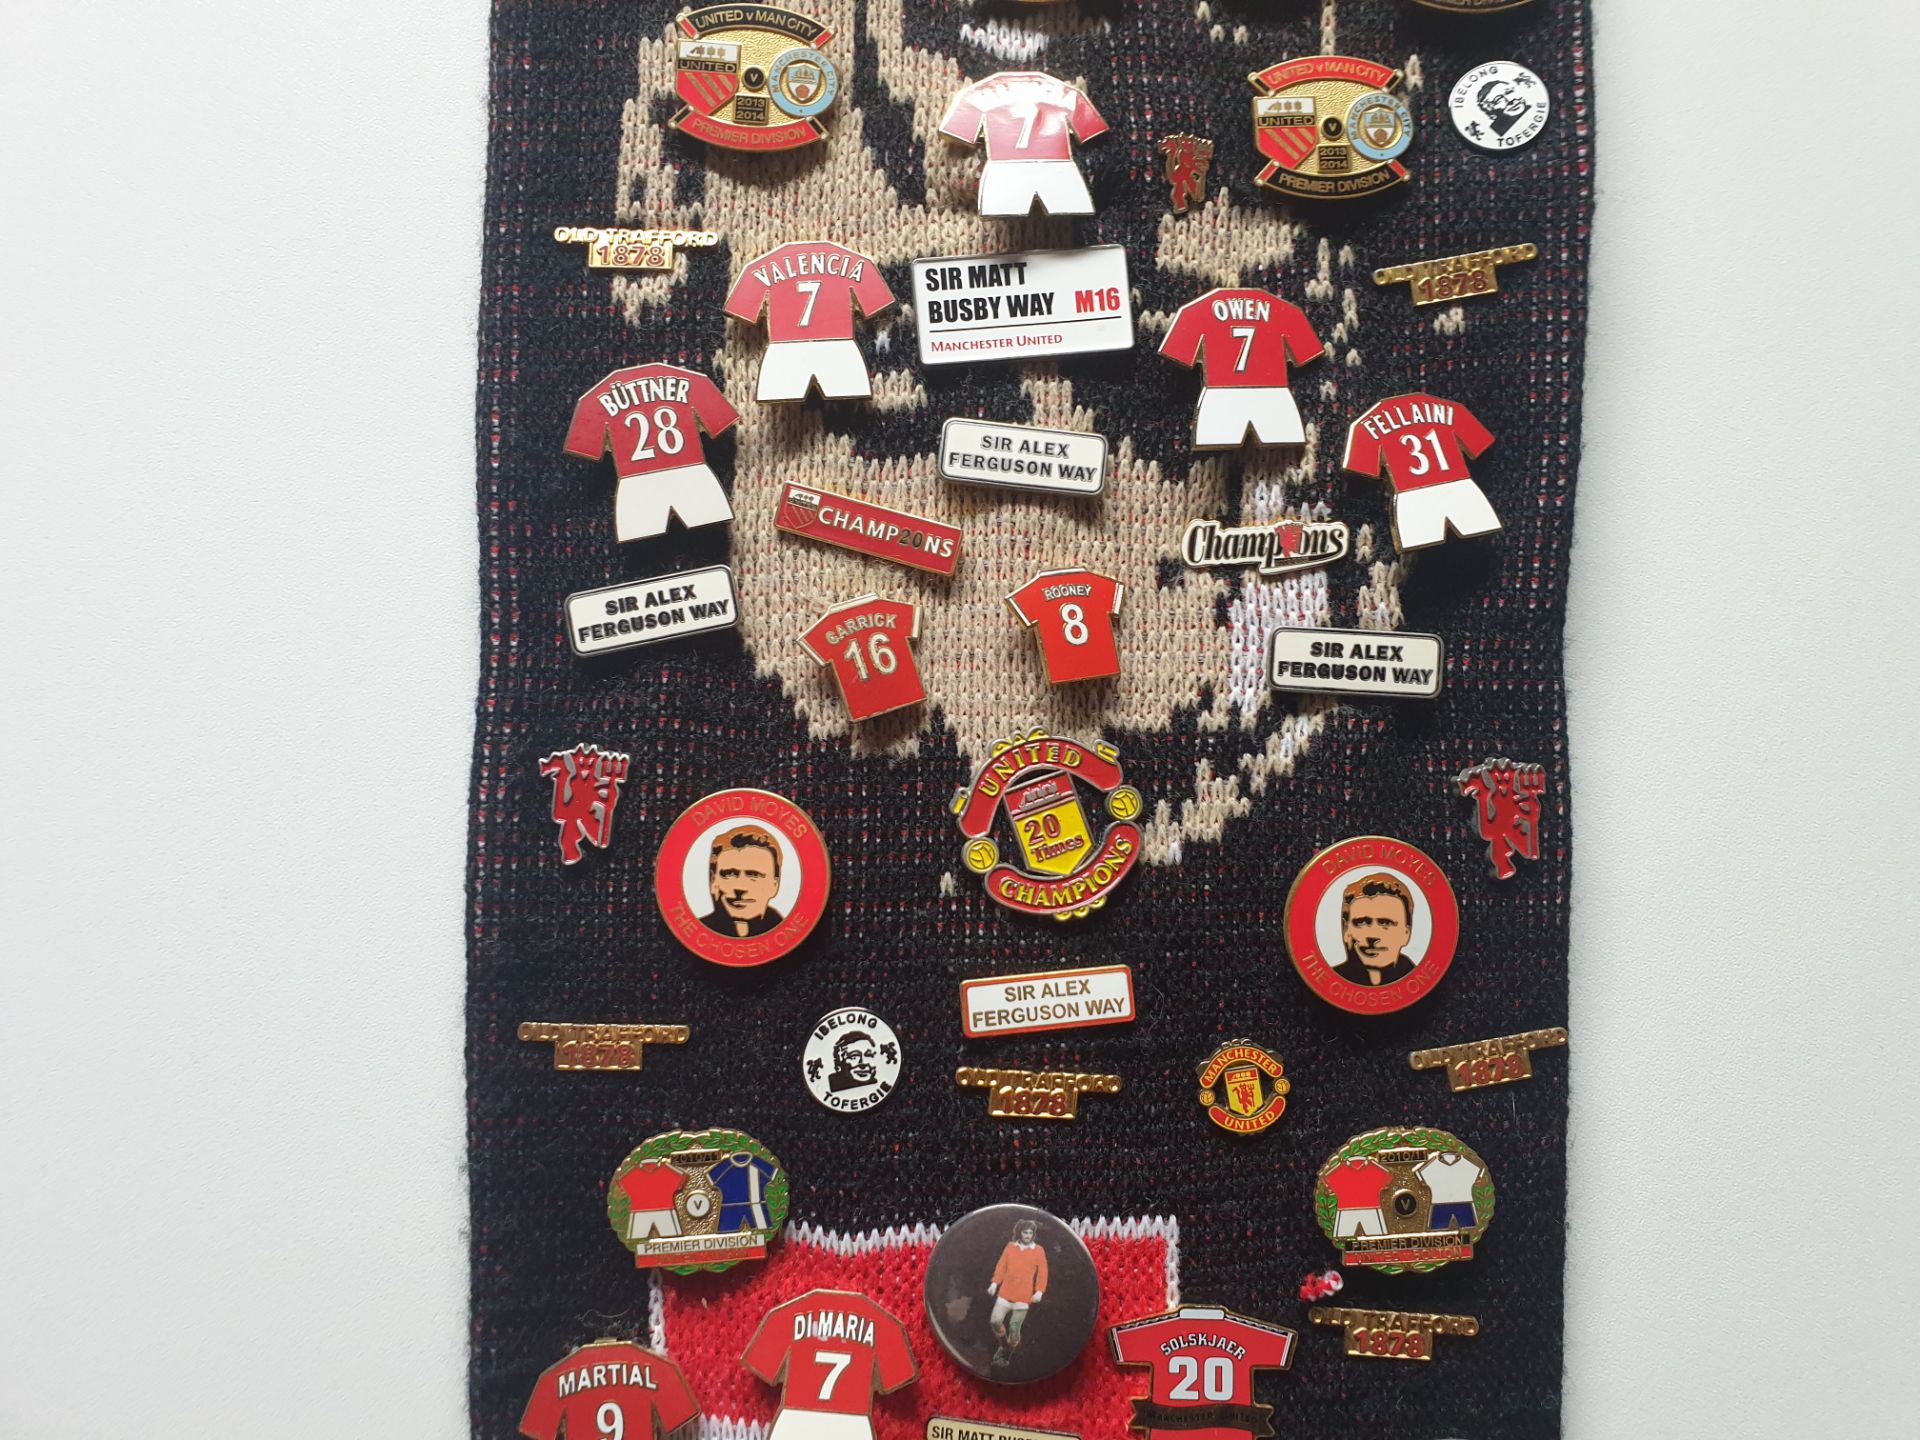 MANCHESTER UNITED SCARF CONTAINING APPROX 170 X PIN BADGES IE CHAMPIONS 2013, SIR ALEX FERGUSON WAY, - Image 3 of 8